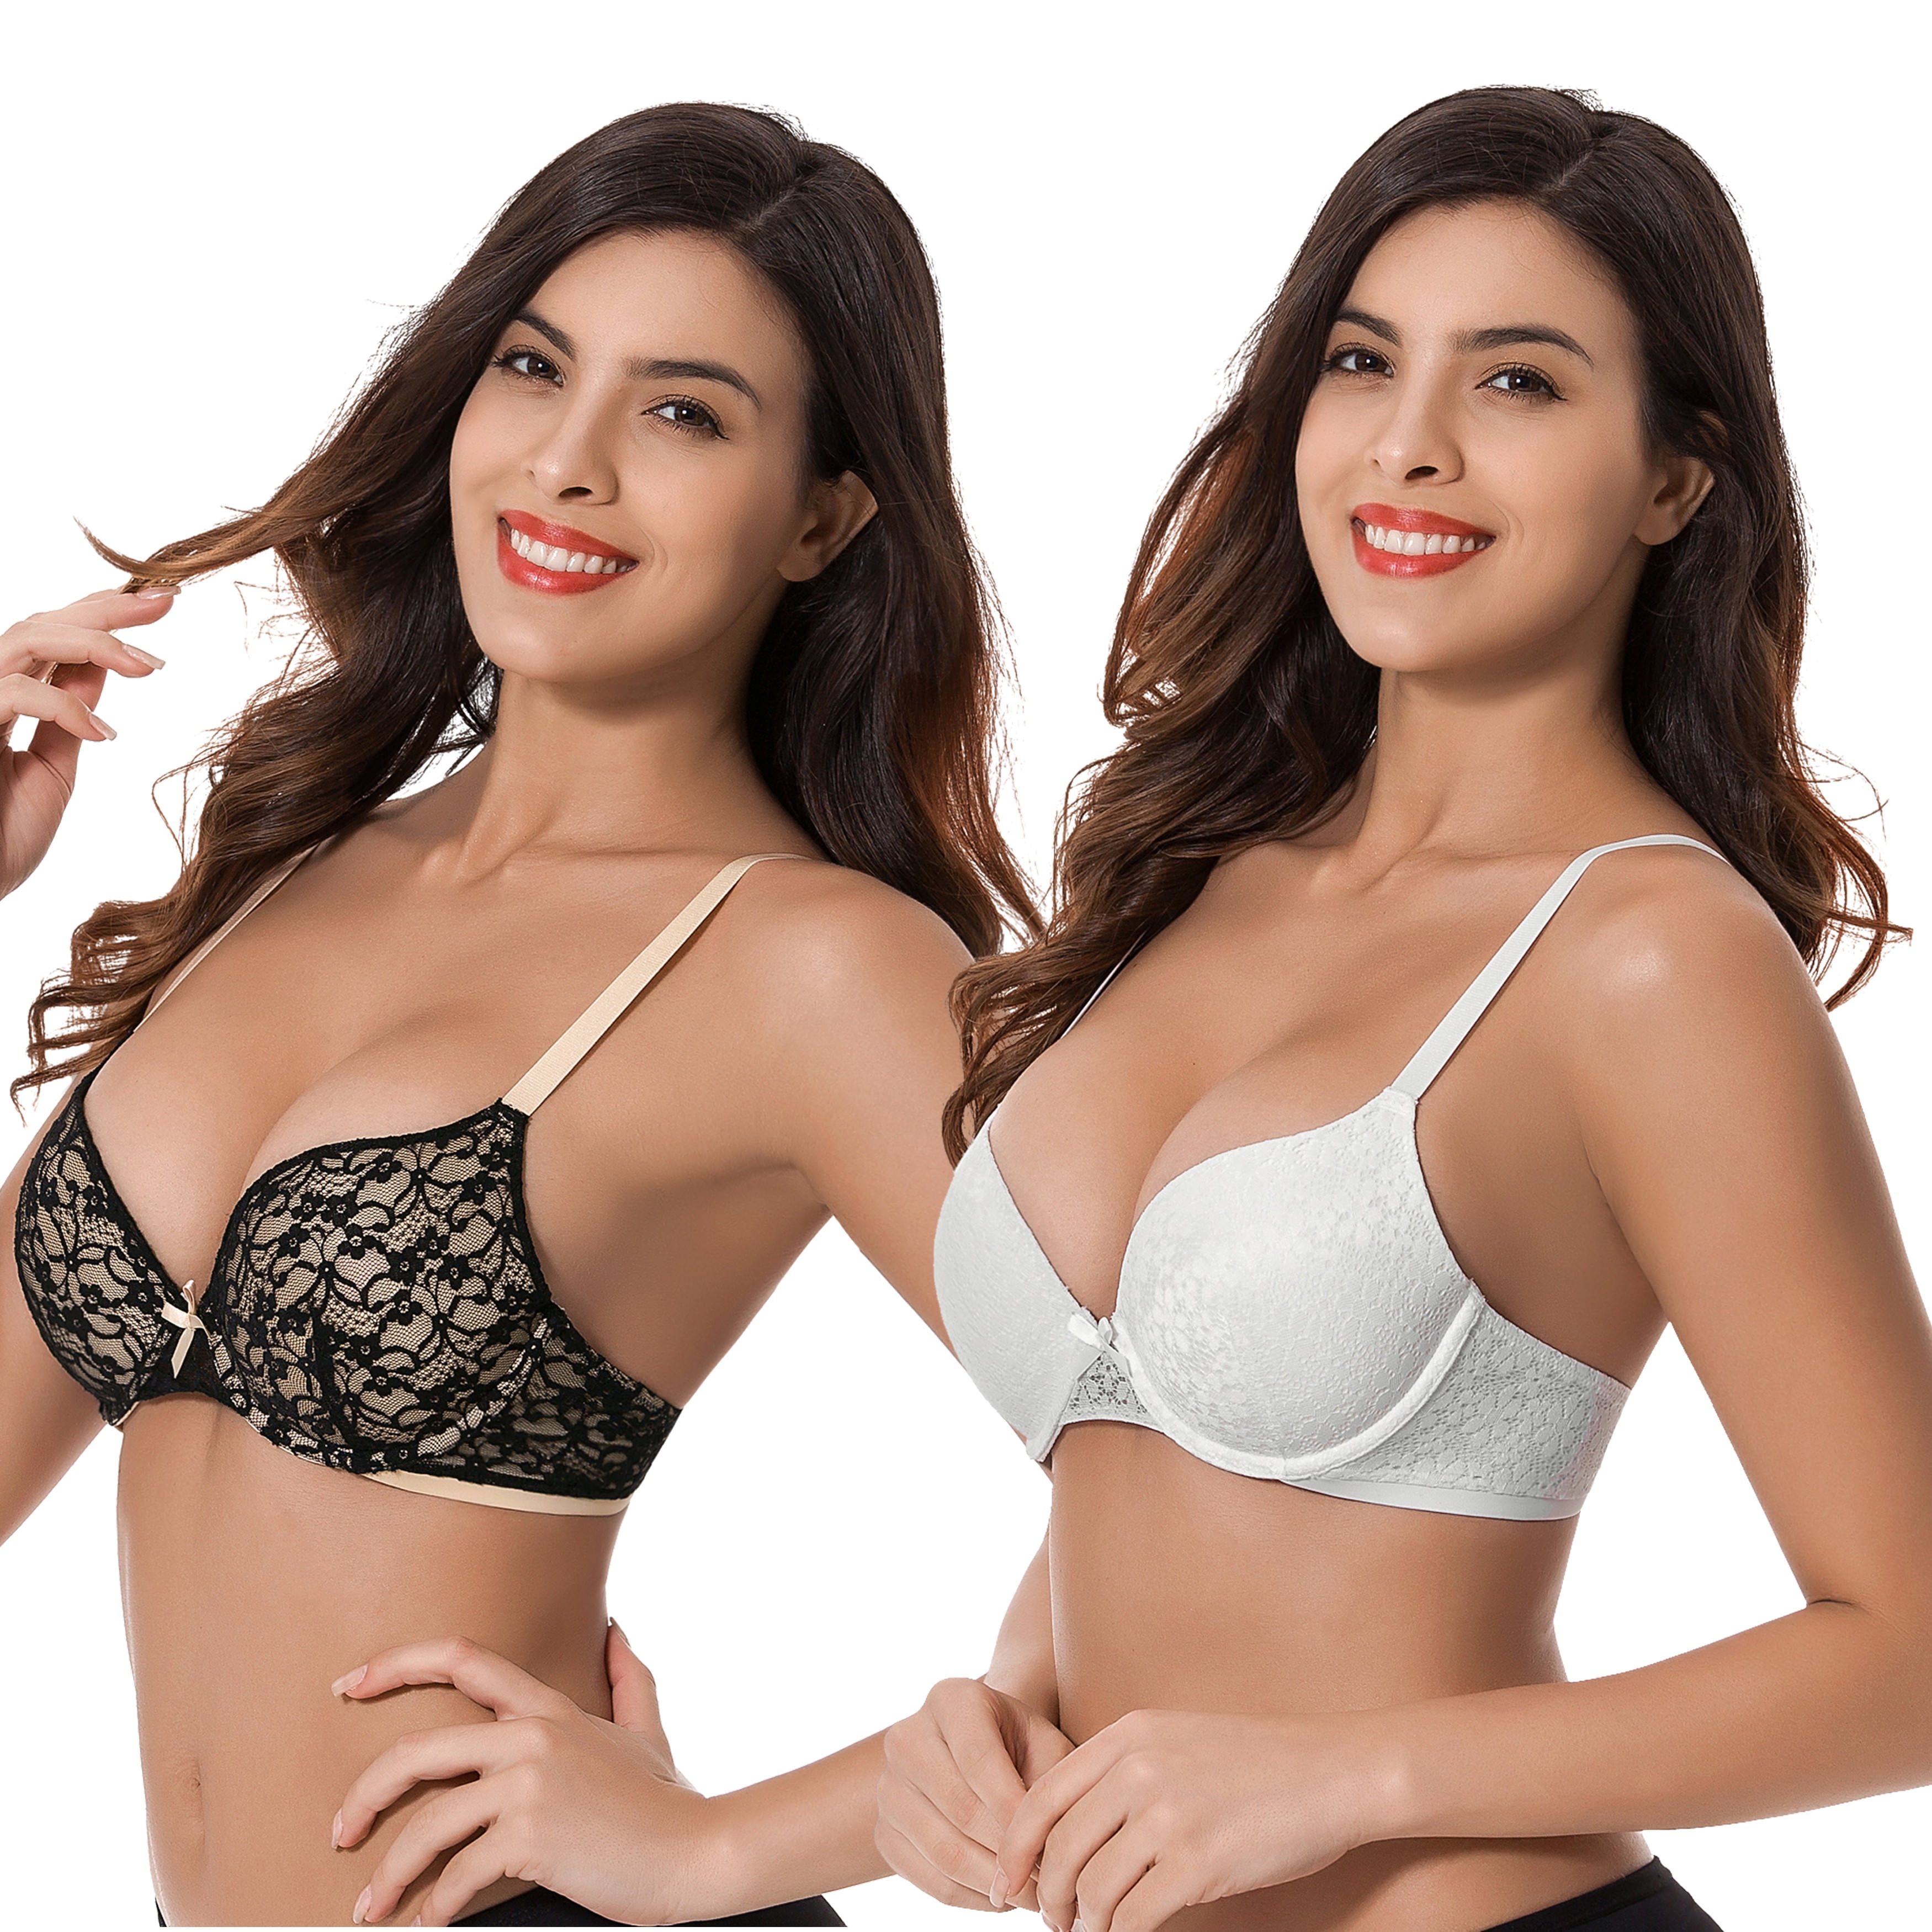 Curve Muse Women's Plus Size Lightly Padded Balconette Lace Underwire Bra-2Pack-Black,Red-34B  at  Women's Clothing store